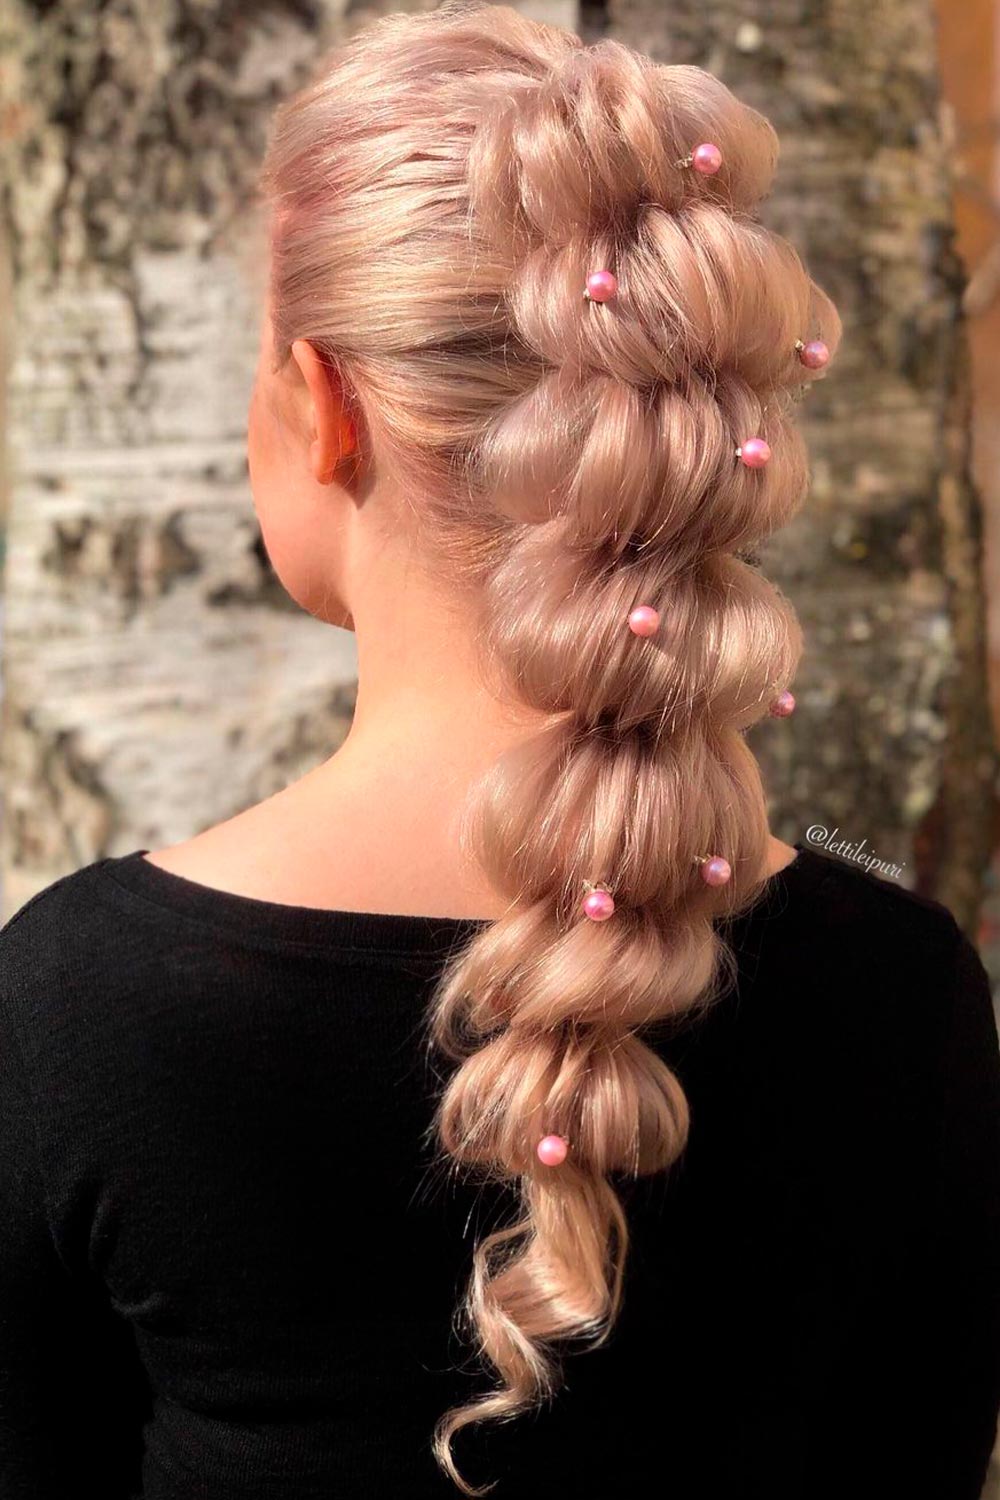 What is not to love about braids? They are one of the best long hair Christmas hairstyles, as on the one hand, they keep your locks tamed and on the other hand, they look absolutely gorgeous regardless of the chosen braid type